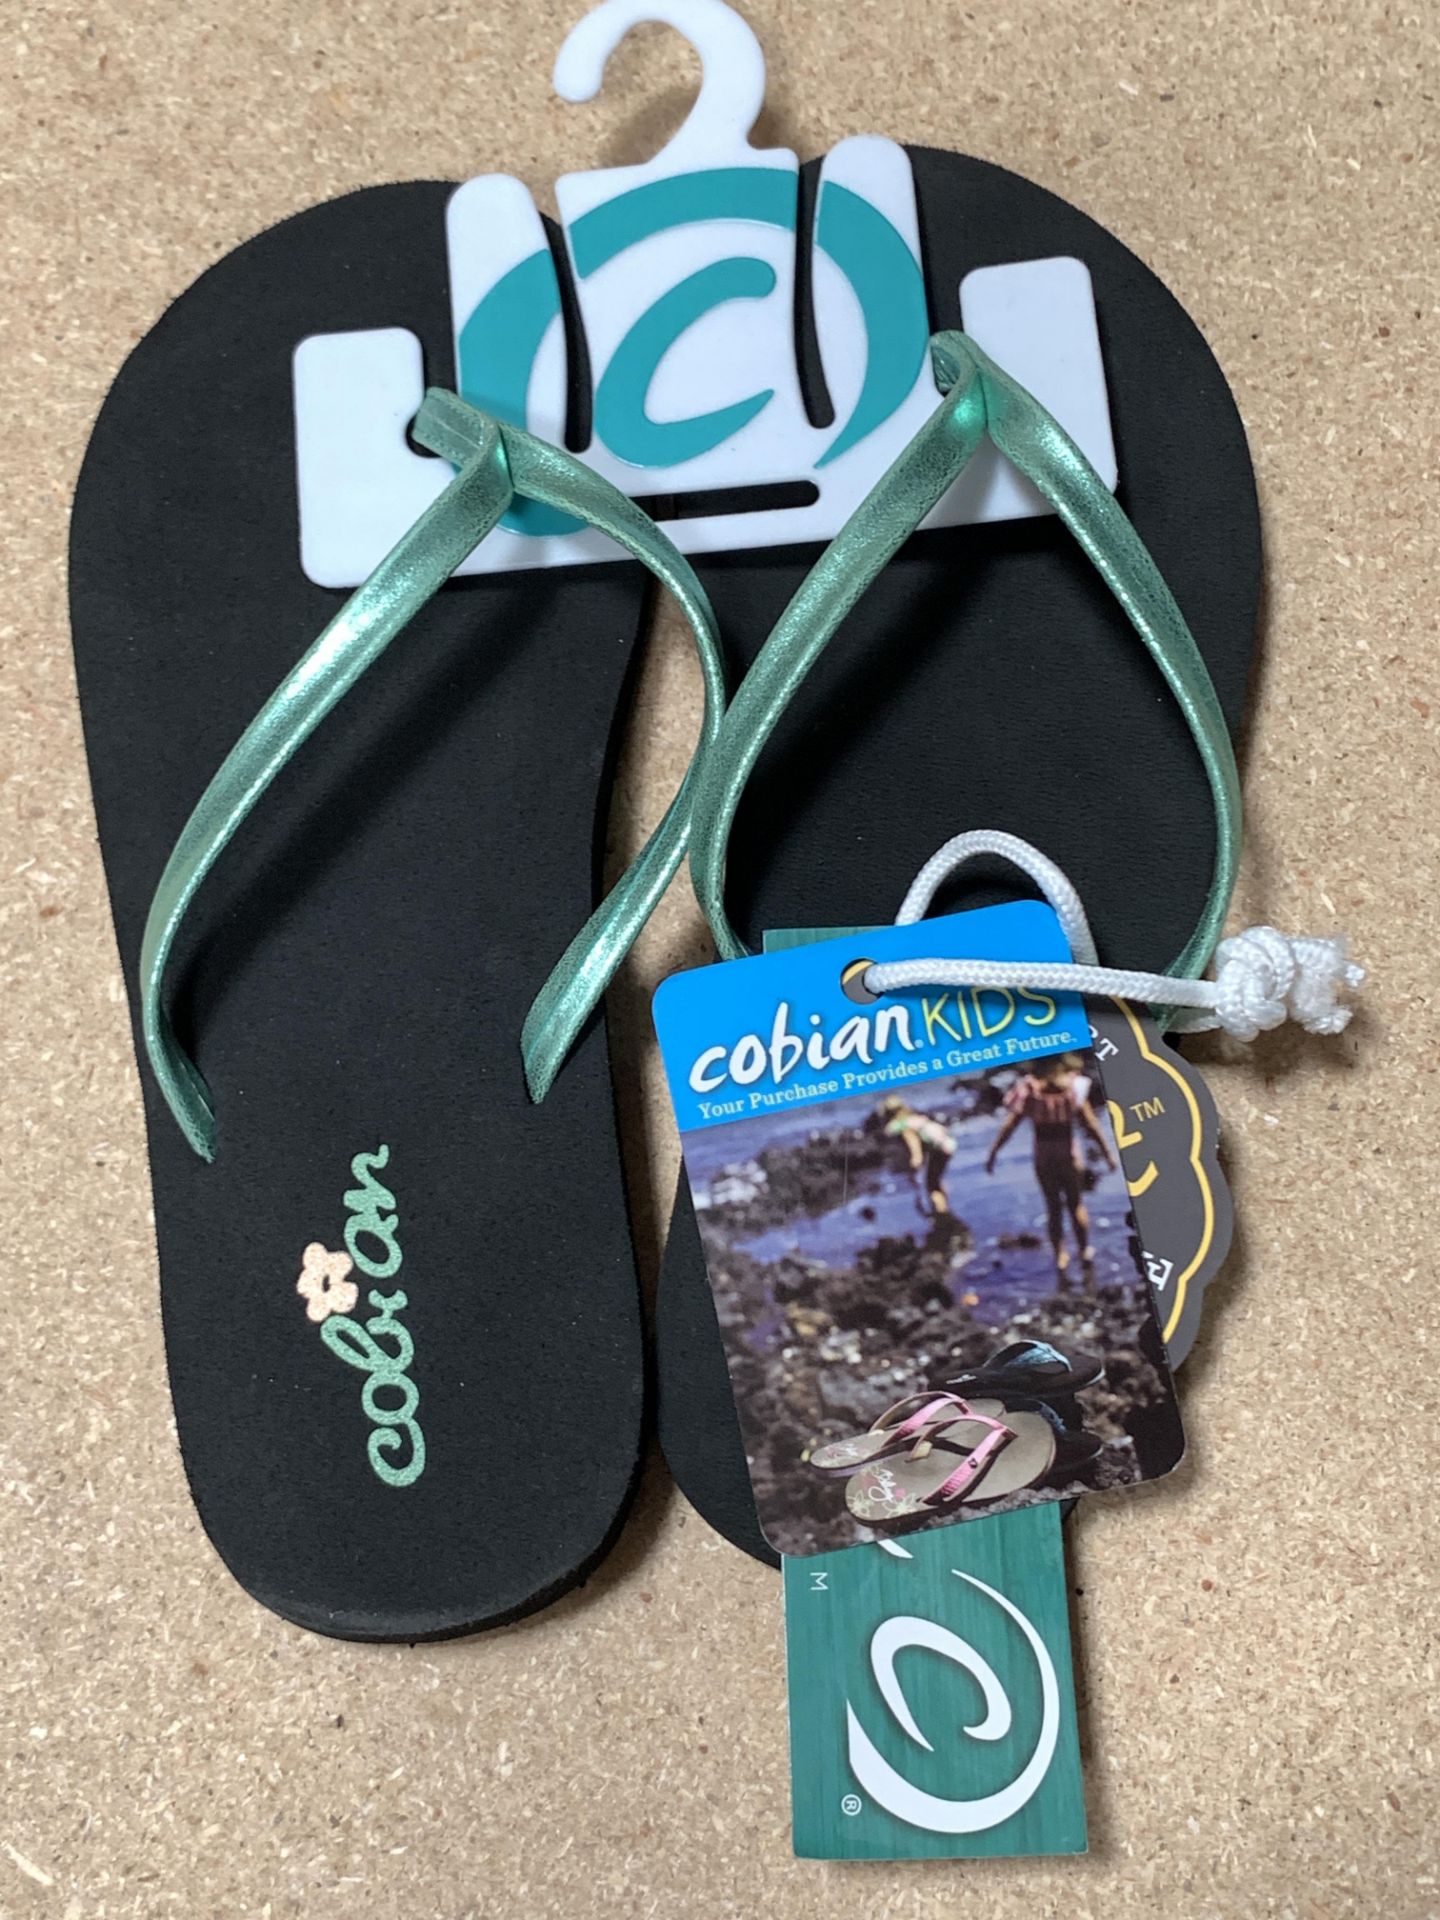 10 Pairs Cobian Kids Flip Flop Sandals, Lil Shimmer &Lil Lalati, New, Various Sizes (Retail $240) - Image 7 of 8